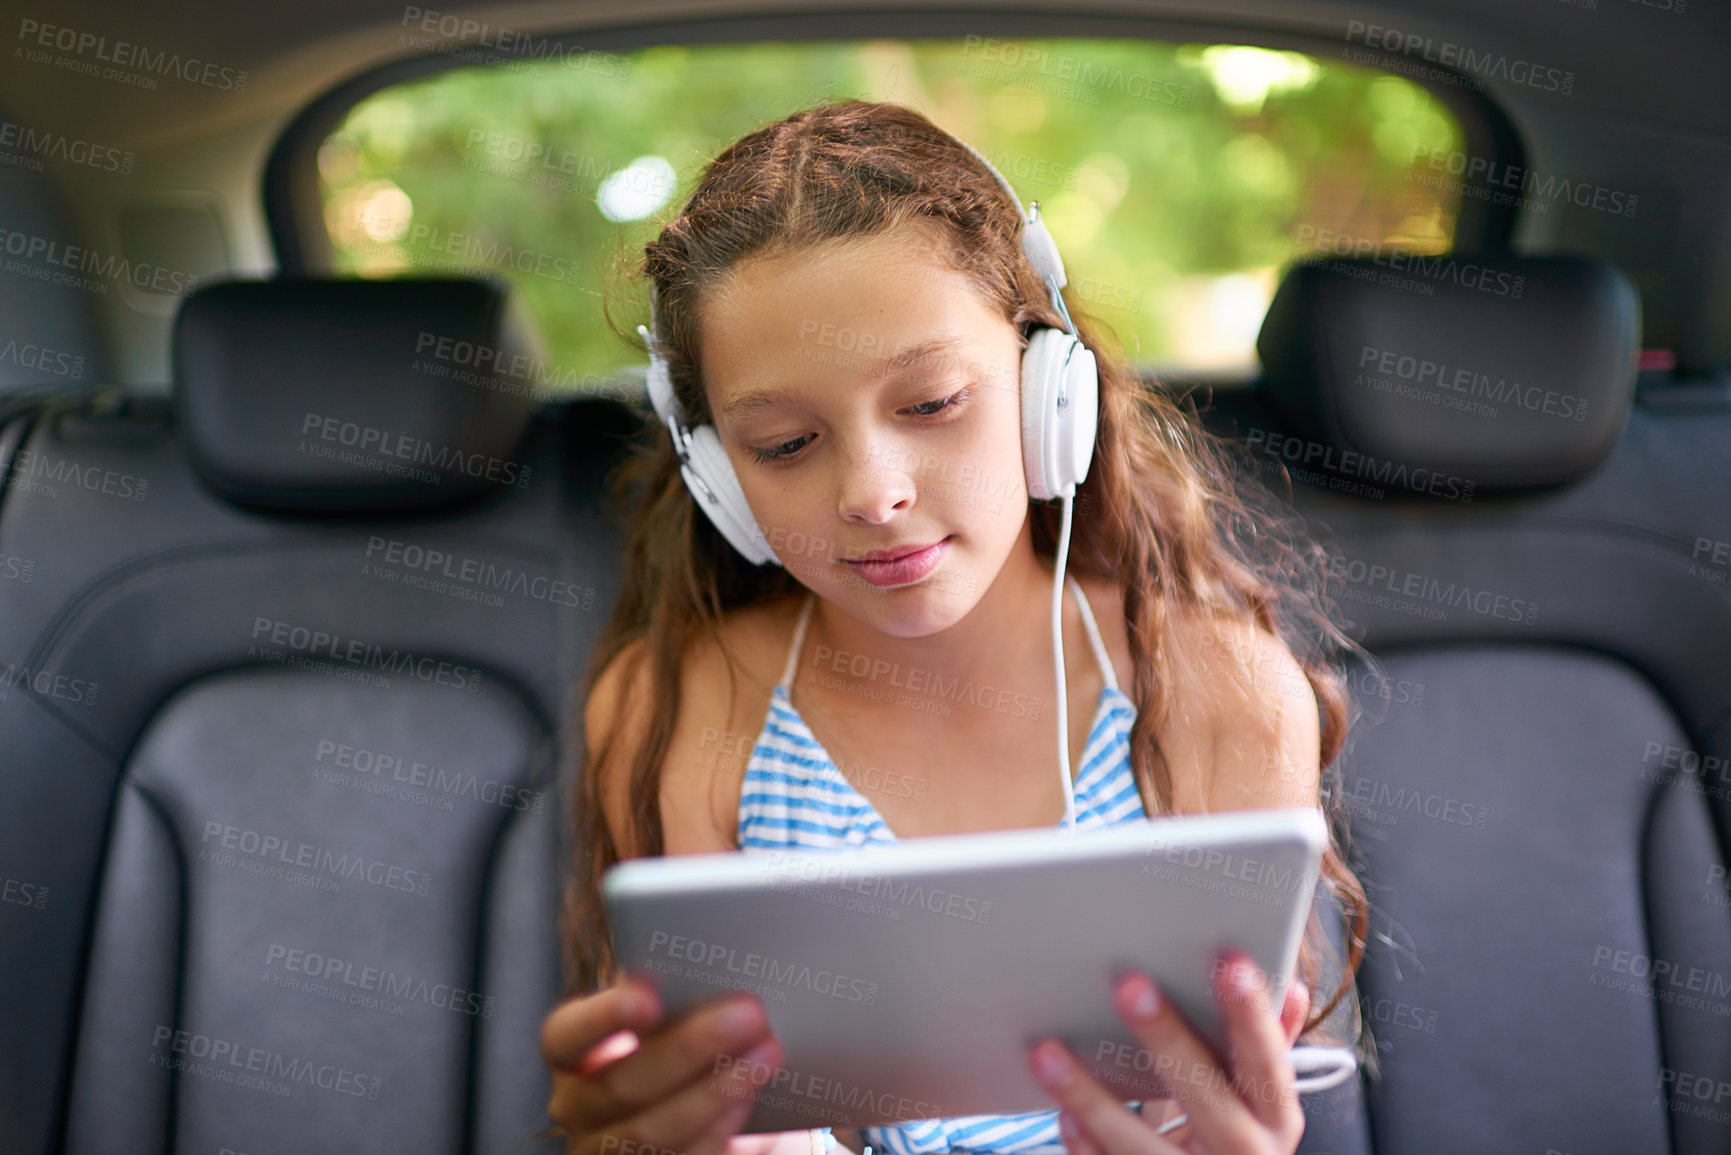 Buy stock photo Shot of a young girl sitting in a car backseat wearing headphones and using a digital tablet